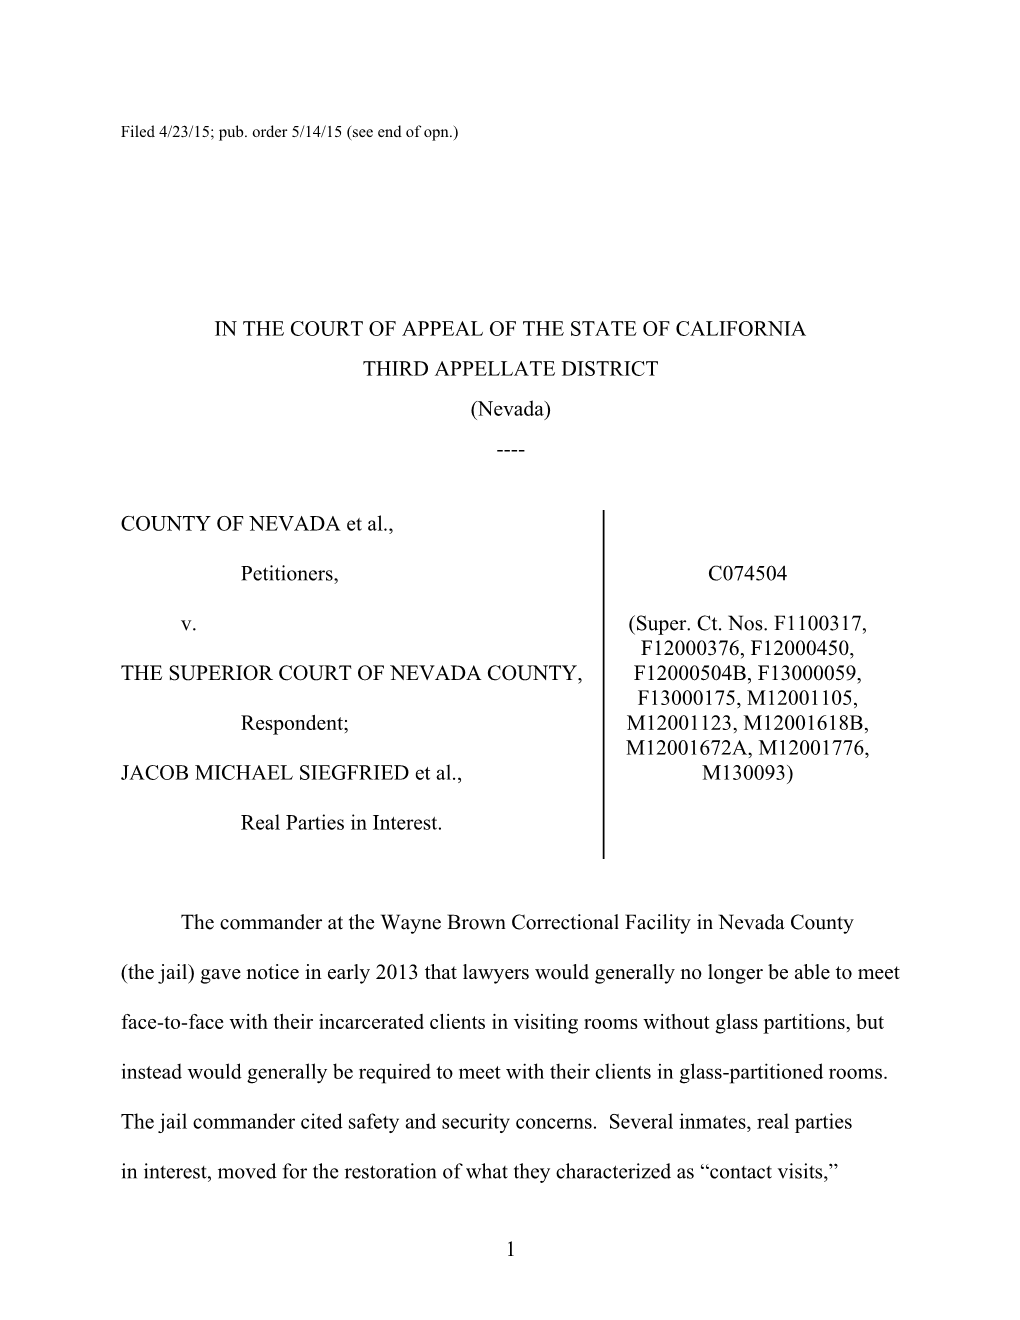 Filed 4/23/15; Pub. Order 5/14/15 (See End of Opn.)